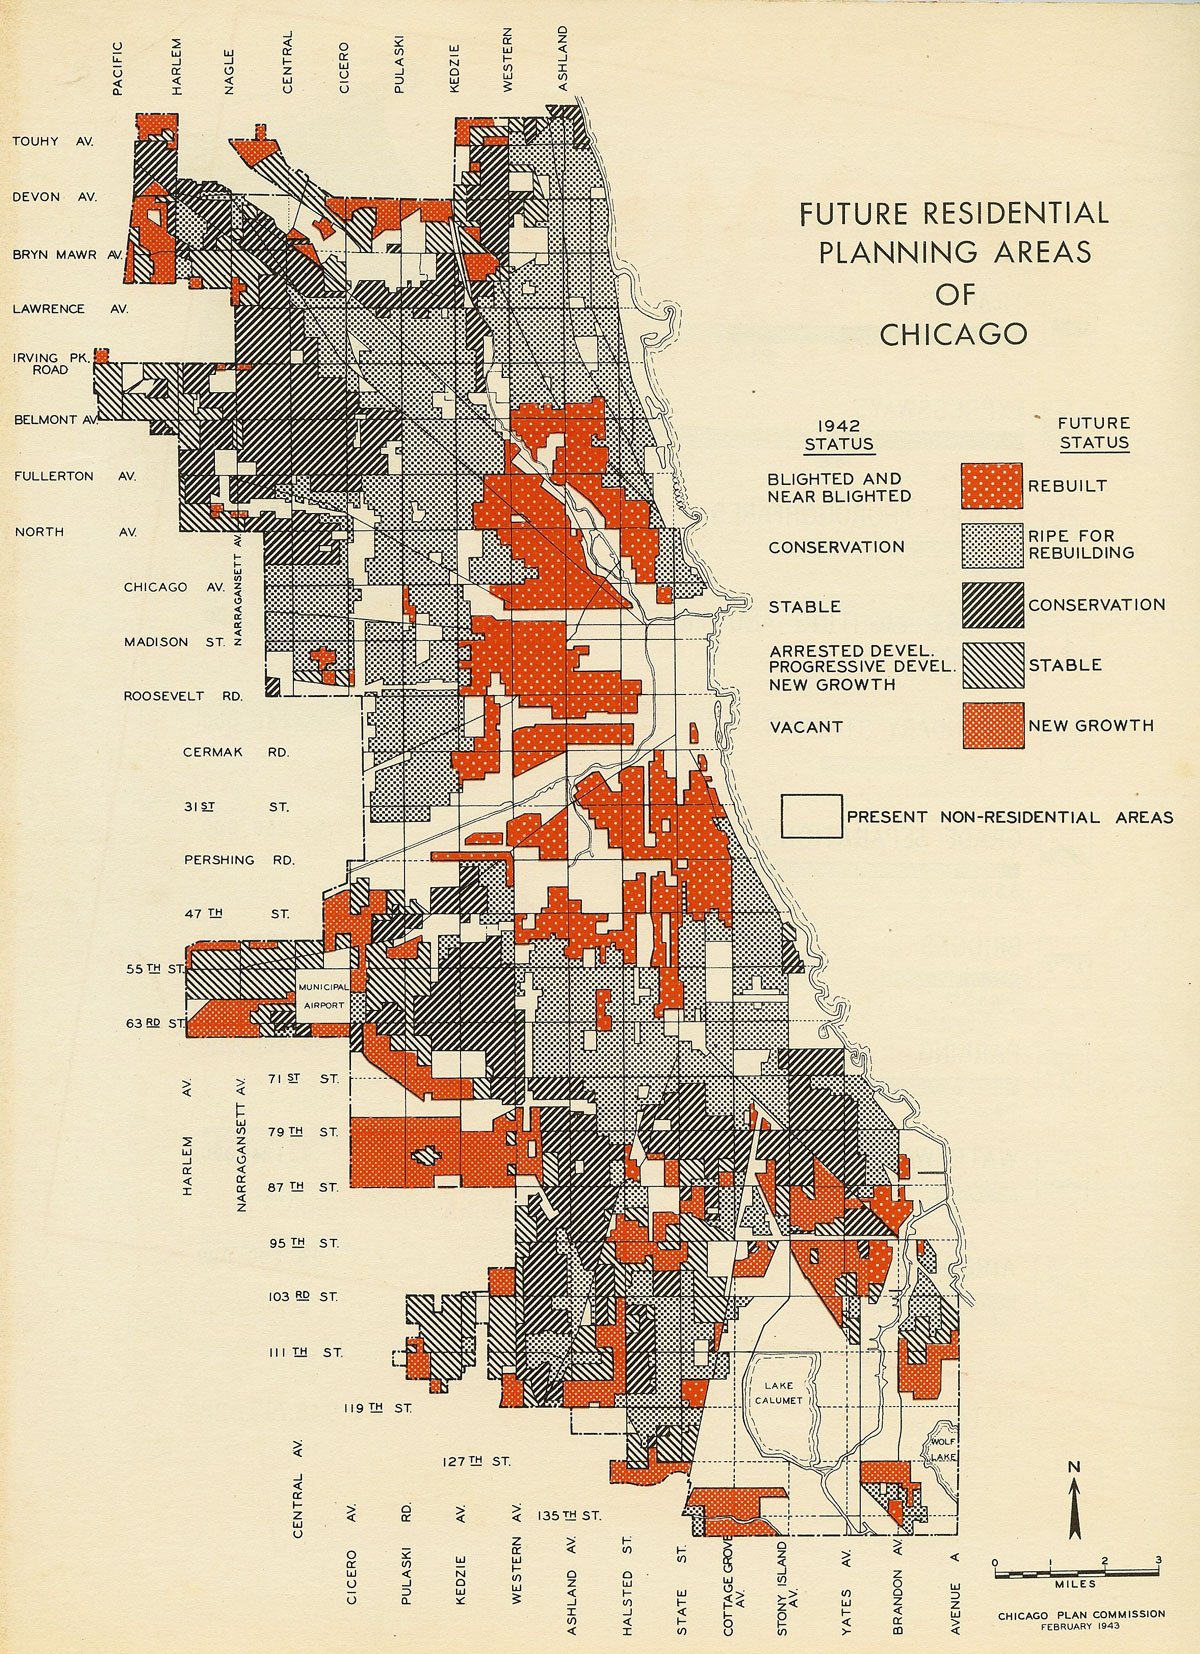 Future Residential Planning Areas of Chicago, 1954